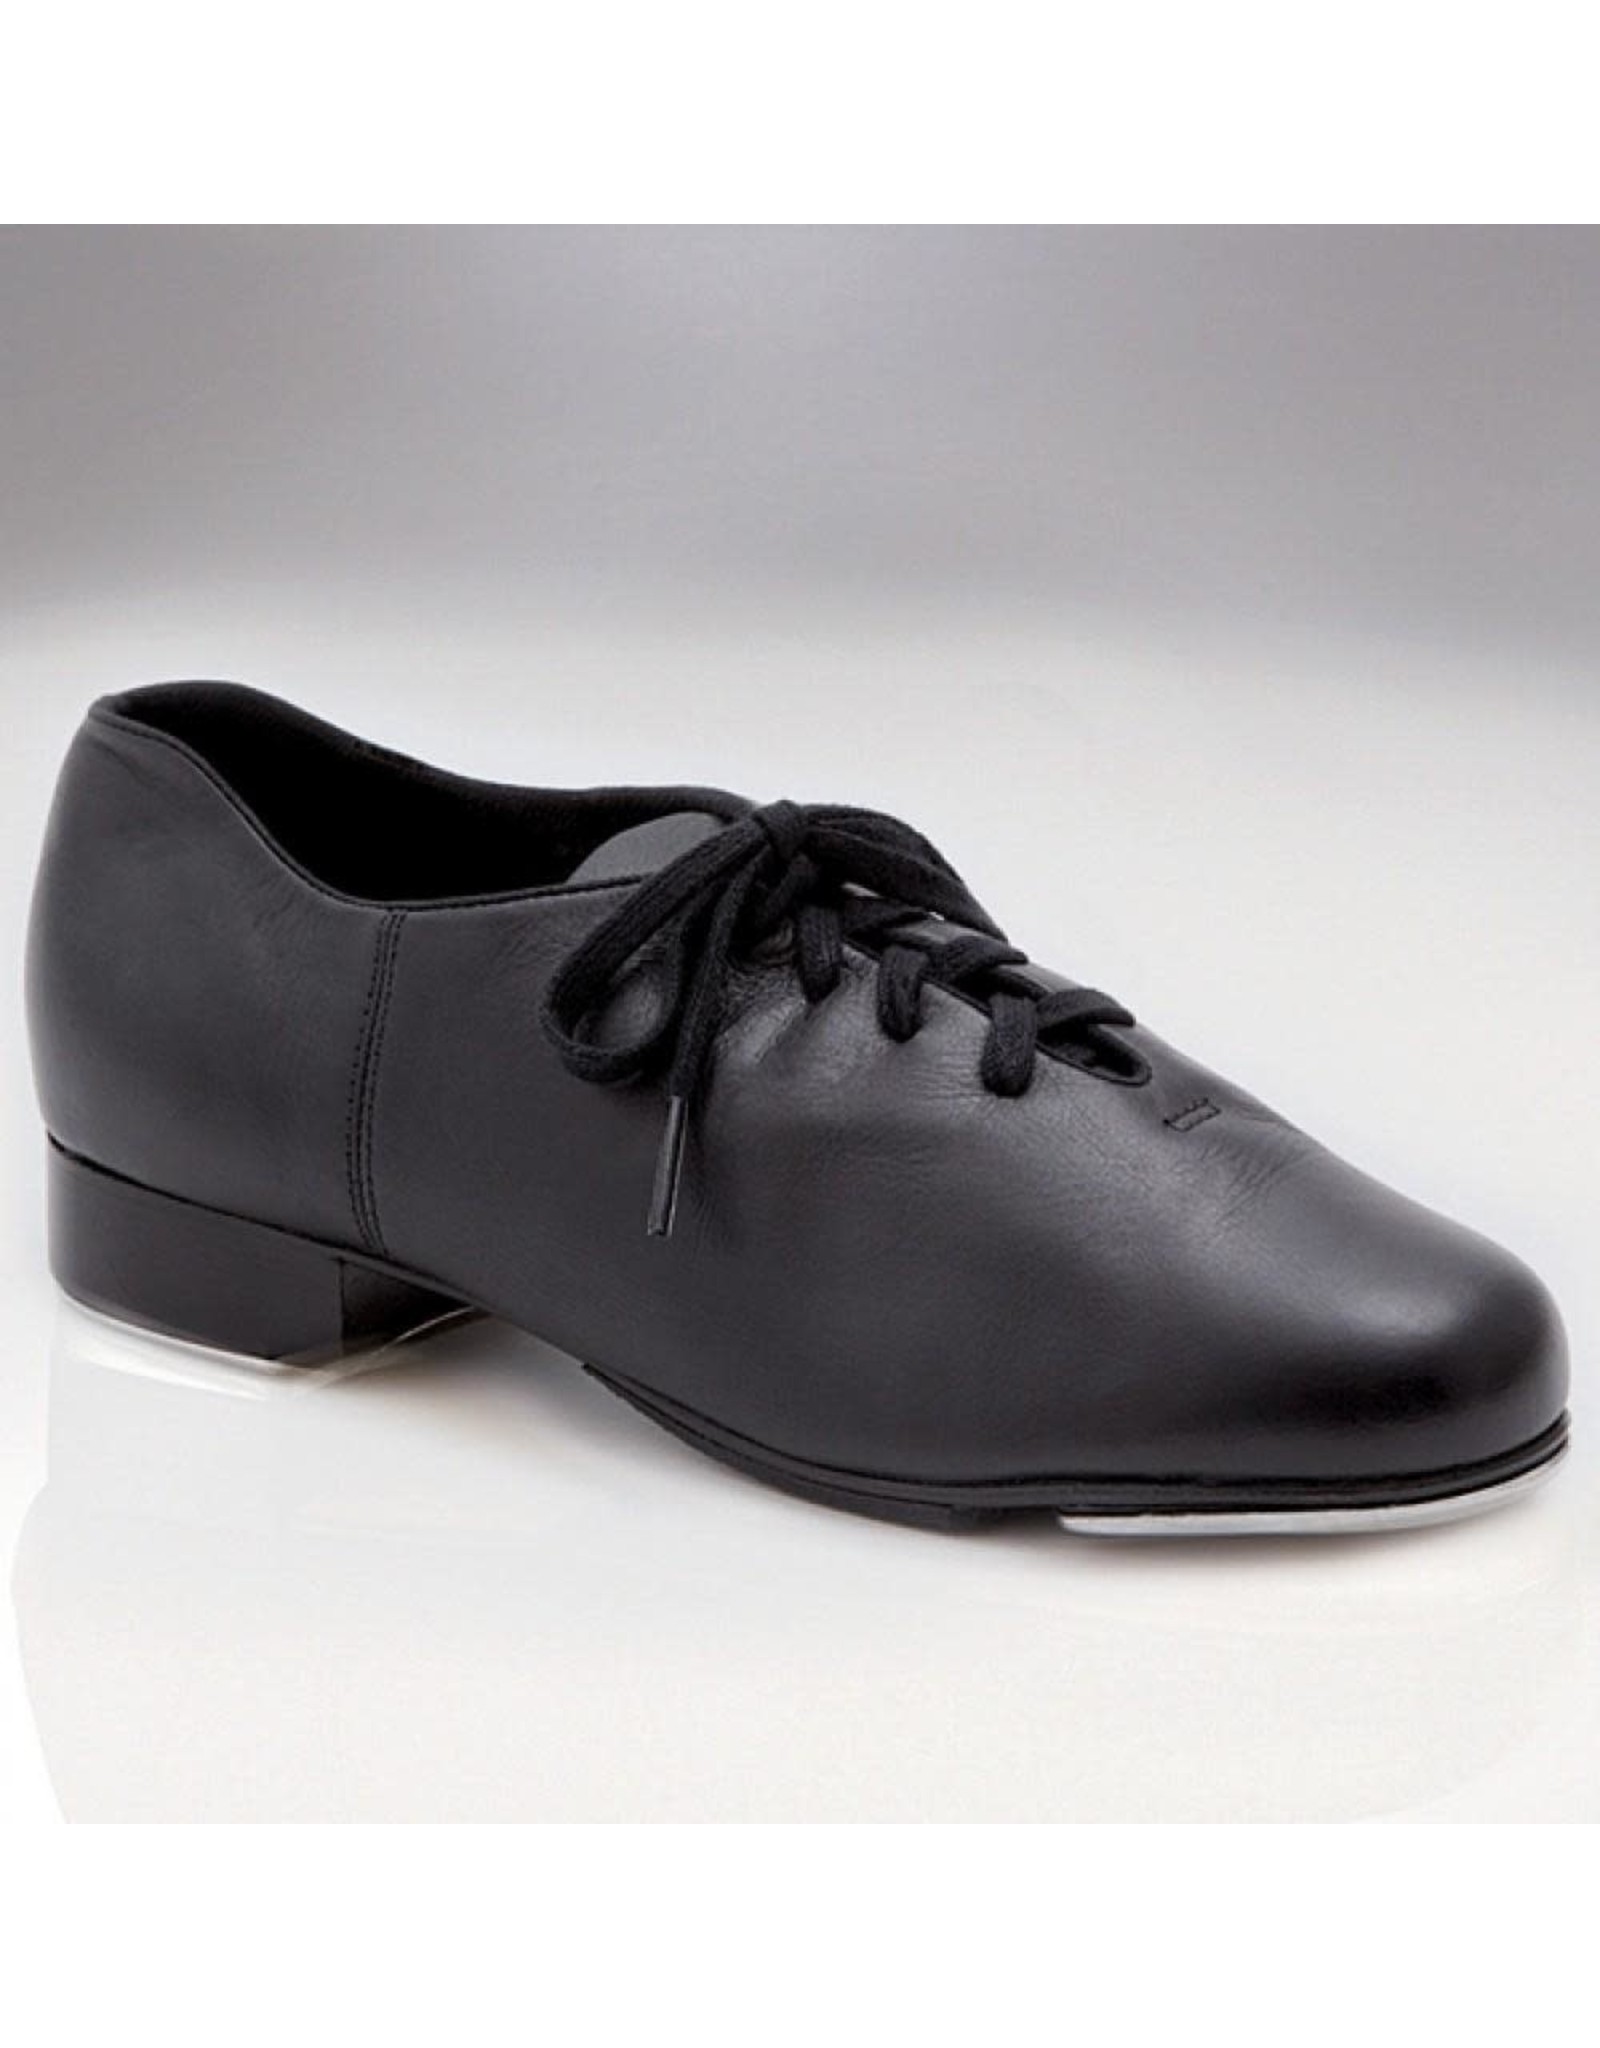 cg19 capezo cadence black leather tap shoes teletone heel and toe taps 